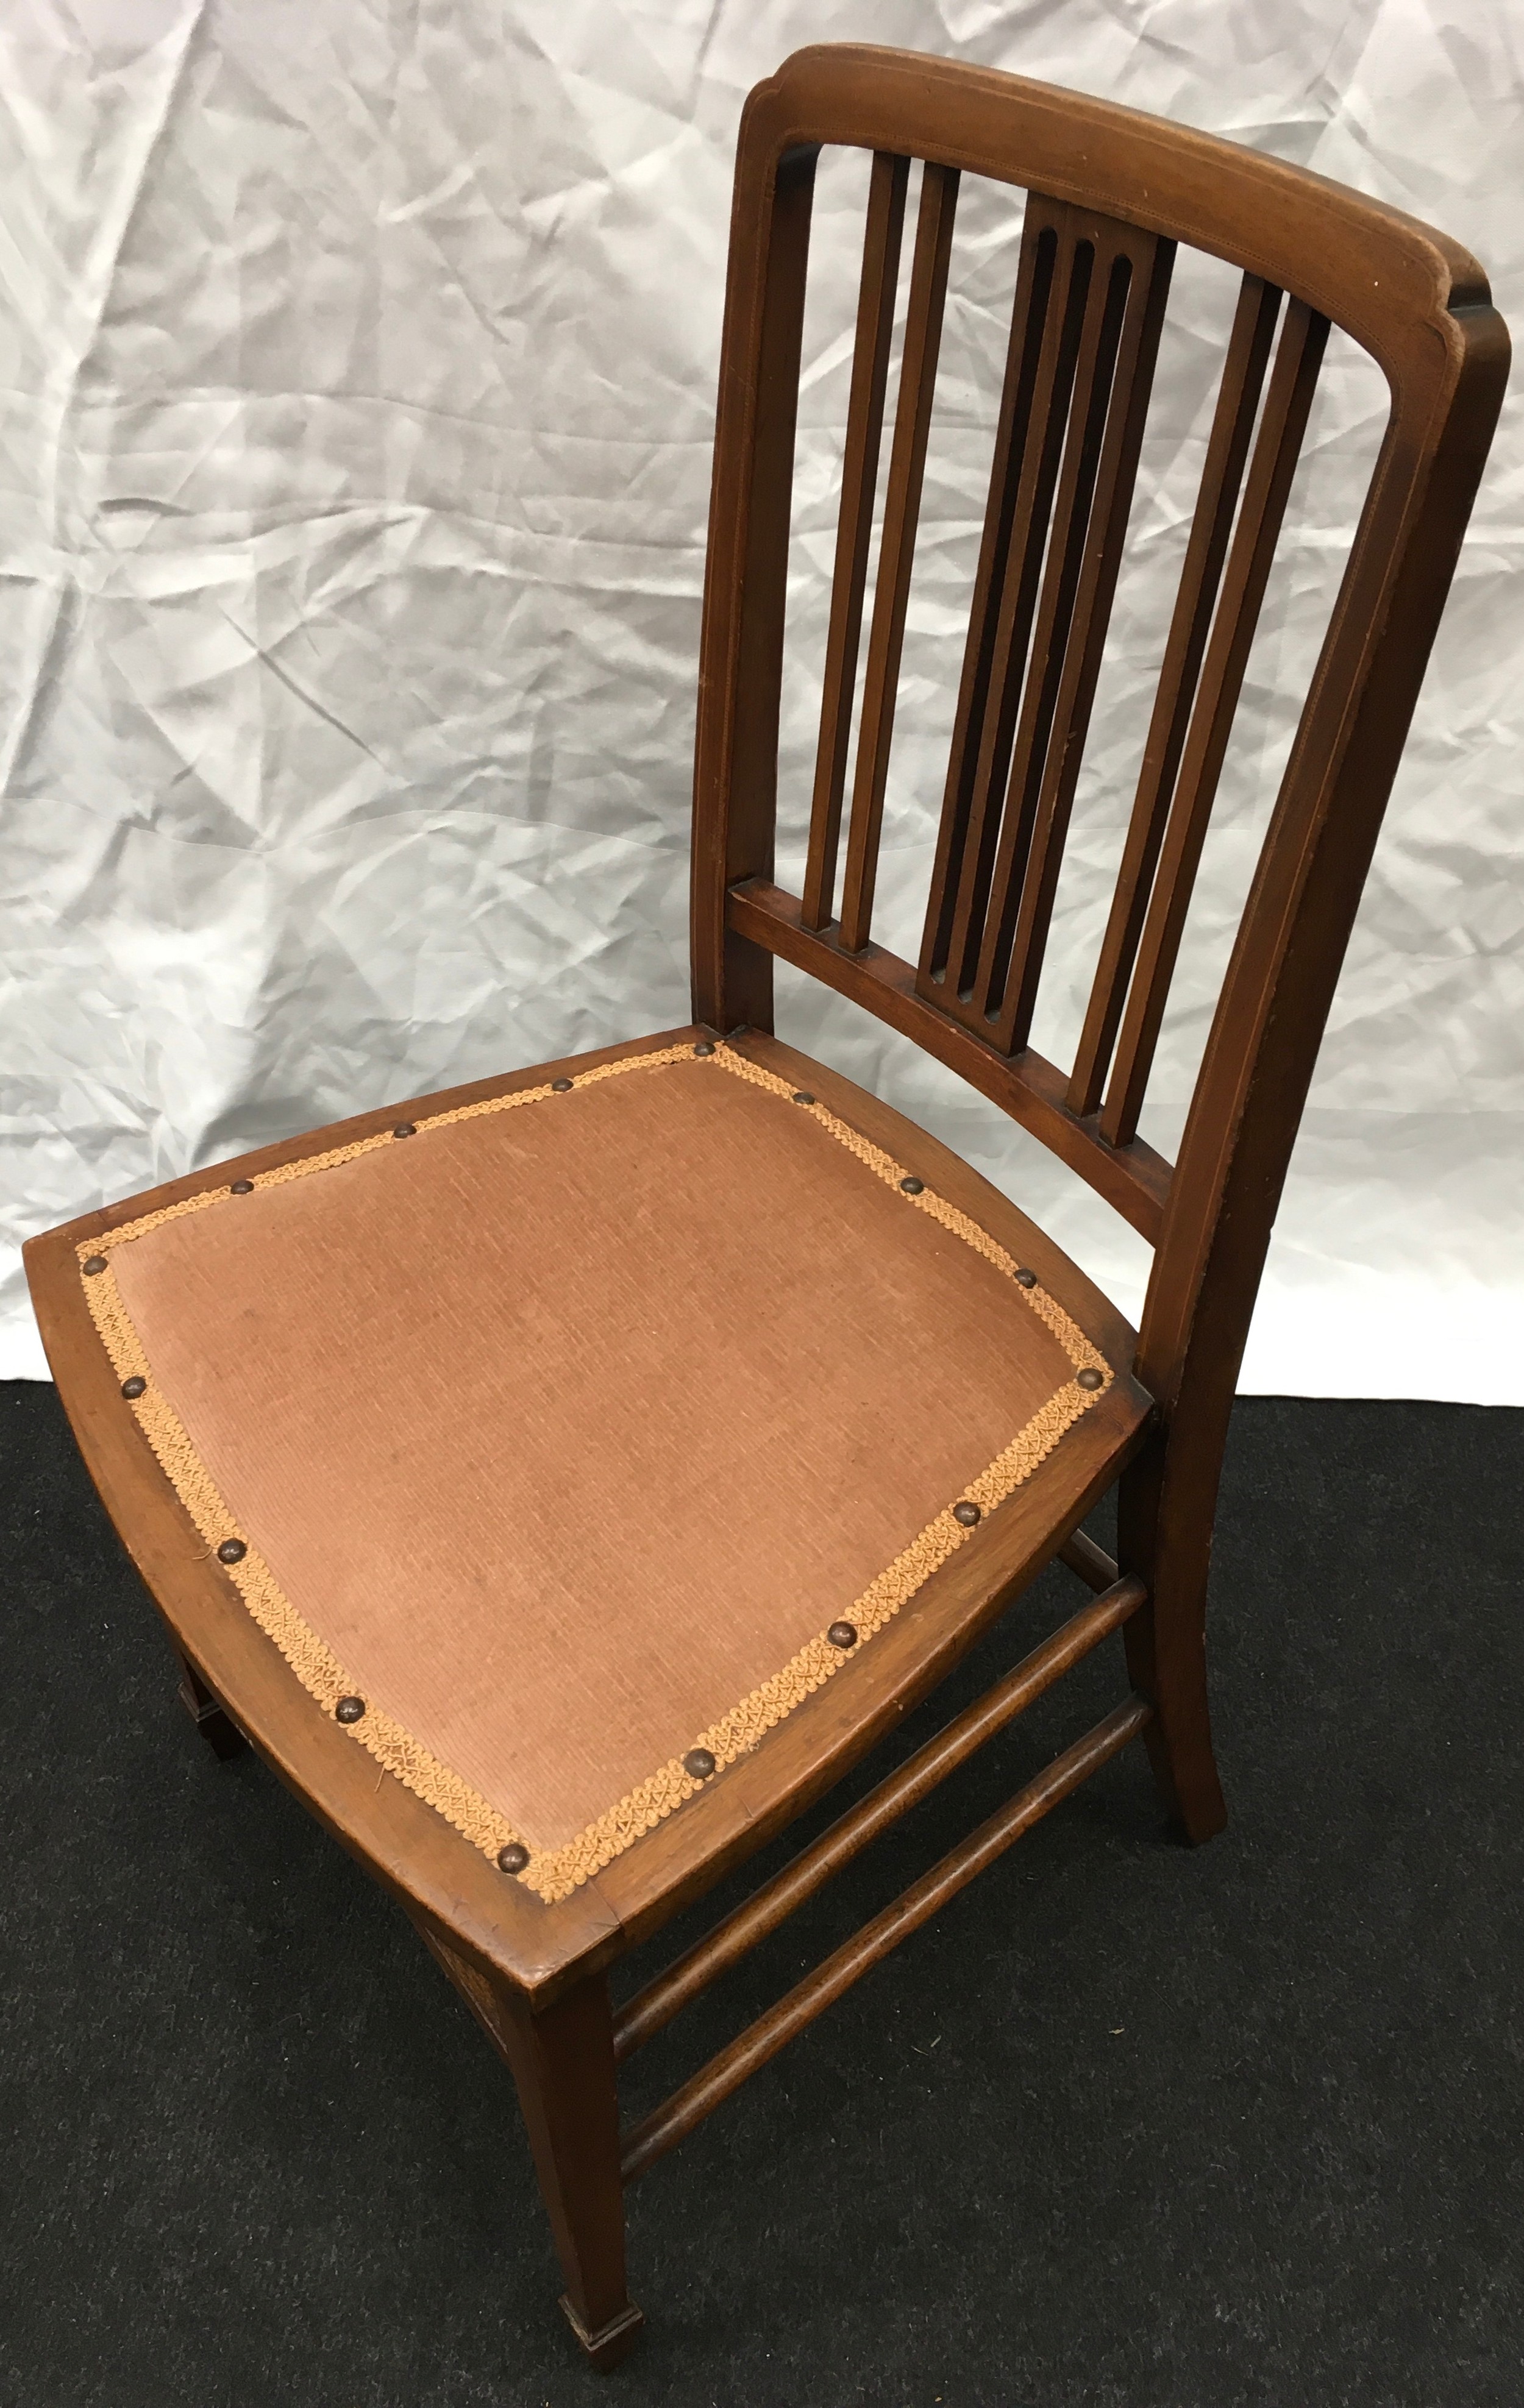 Arts & Crafts inlaid chair by Allen & Appleyard with makers mark 80x42x39cm. - Image 2 of 3